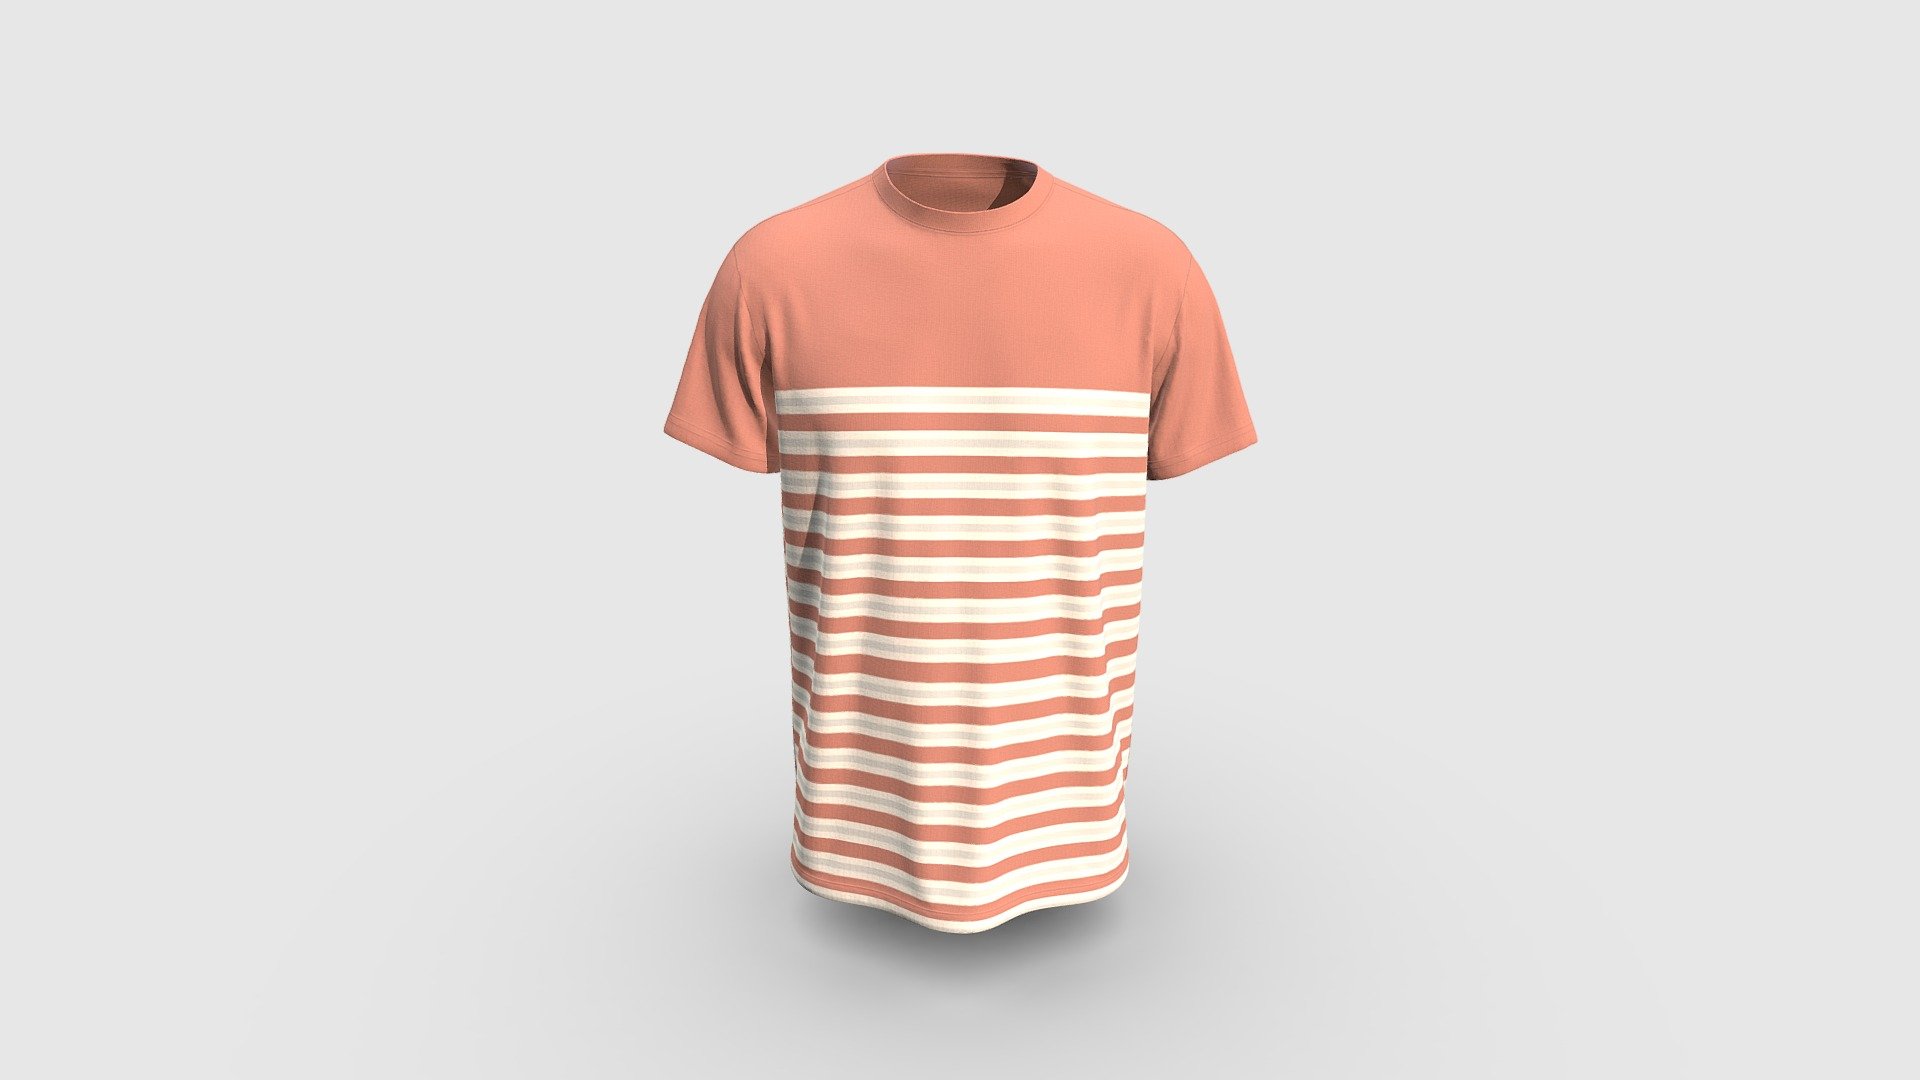 Cloth Title = Clothing Design For Tee 
 
SKU = DG100209 

Category = Unisex
 
Product Type = T-Shirt 

Cloth Length = Regular
 
Body Fit = Loose Fit
 
Occasion = Casual 
 
Sleeve Style = Set In Sleeve
  

Our Services:

3D Apparel Design.

OBJ,FBX,GLTF Making with High/Low Poly.

Fabric Digitalization.

Mockup making.

3D Teck Pack.

Pattern Making.

2D Illustration.

Cloth Animation and 360 Spin Video.


Contact us:- 

Email: info@digitalfashionwear.com 

Website: https://digitalfashionwear.com 


We designed all the types of cloth specially focused on product visualization, e-commerce, fitting, and production. 

We will design: 

T-shirts 

Polo shirts 

Hoodies 

Sweatshirt 

Jackets 

Shirts 

TankTops 

Trousers 

Bras 

Underwear 

Blazer 

Aprons 

Leggings 

and All Fashion items. 





Our goal is to make sure what we provide you, meets your demand 3d model